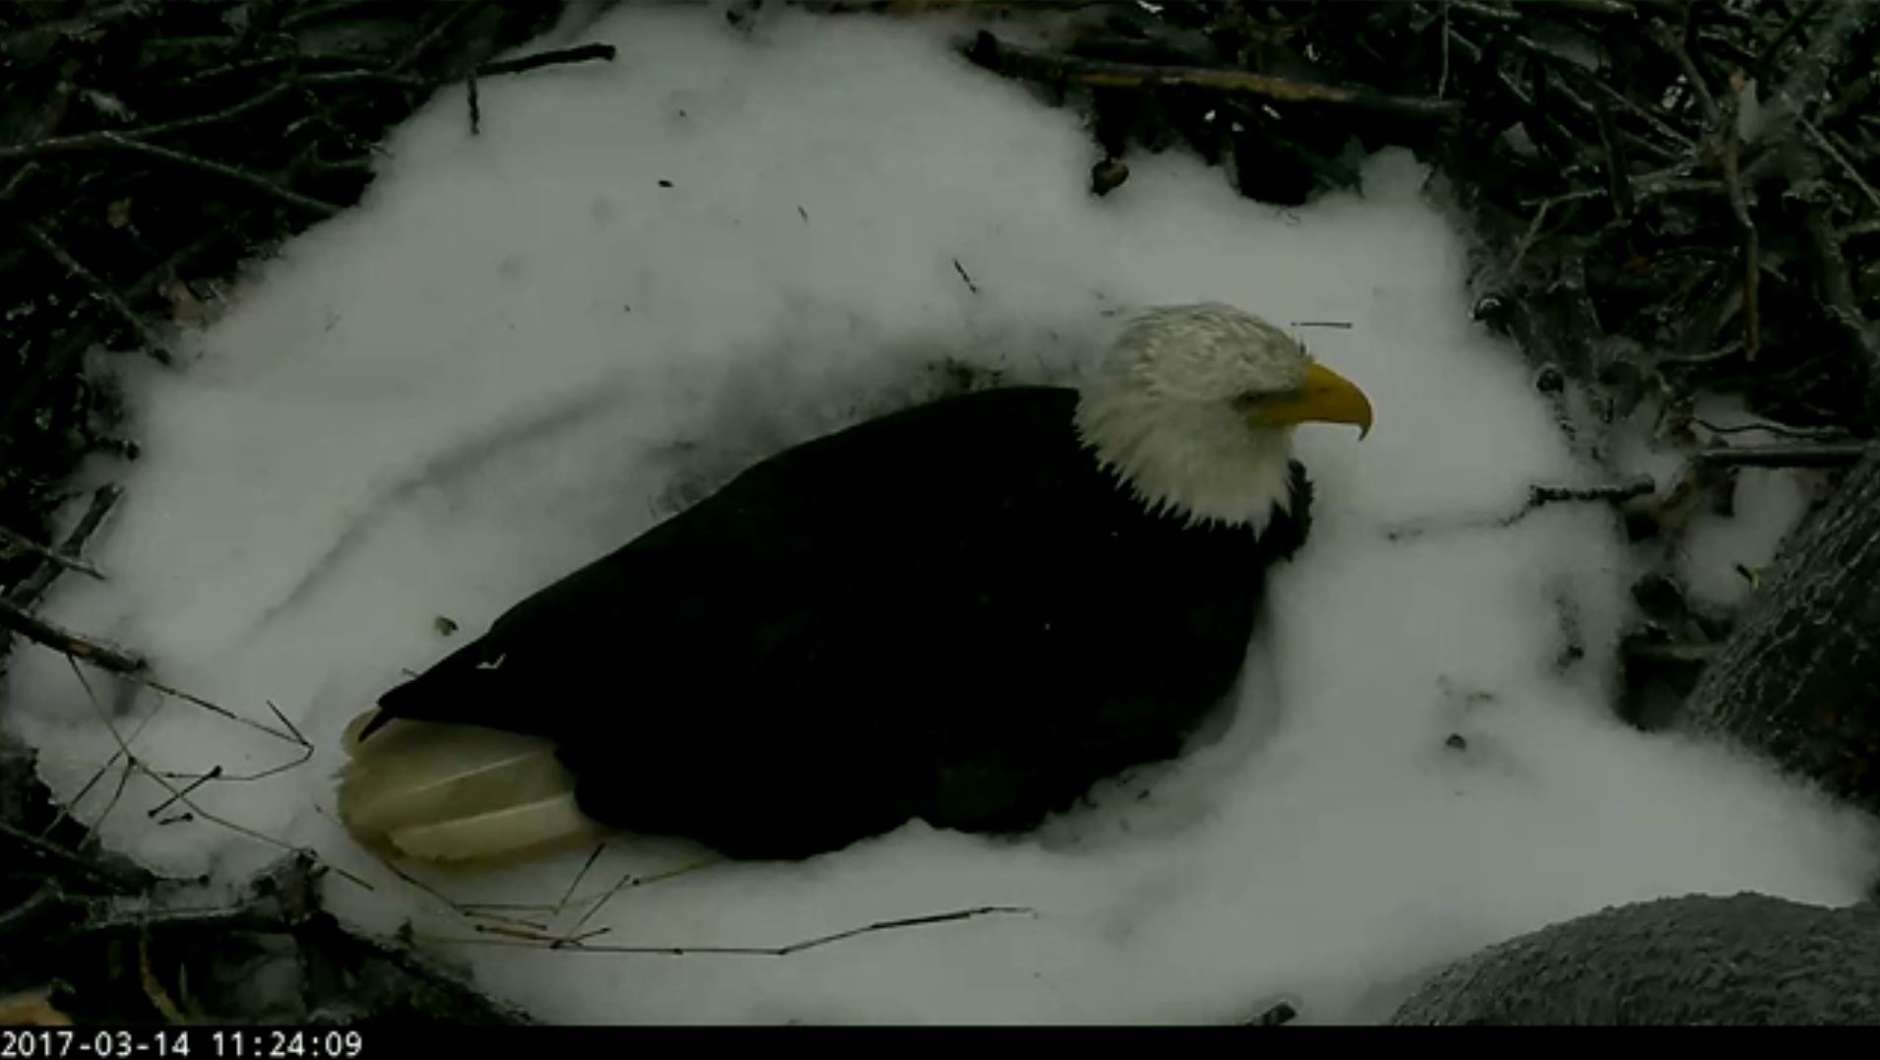 Screenshot from the American Eagle Foundation's eagle camera at the National Arboretum on the morning of March 14, 2017. Bald eagles The First Lady and Mr. President spent the night protecting their eggs. (© 2017 American Eagle Foundation, DCEAGLECAM.ORG)